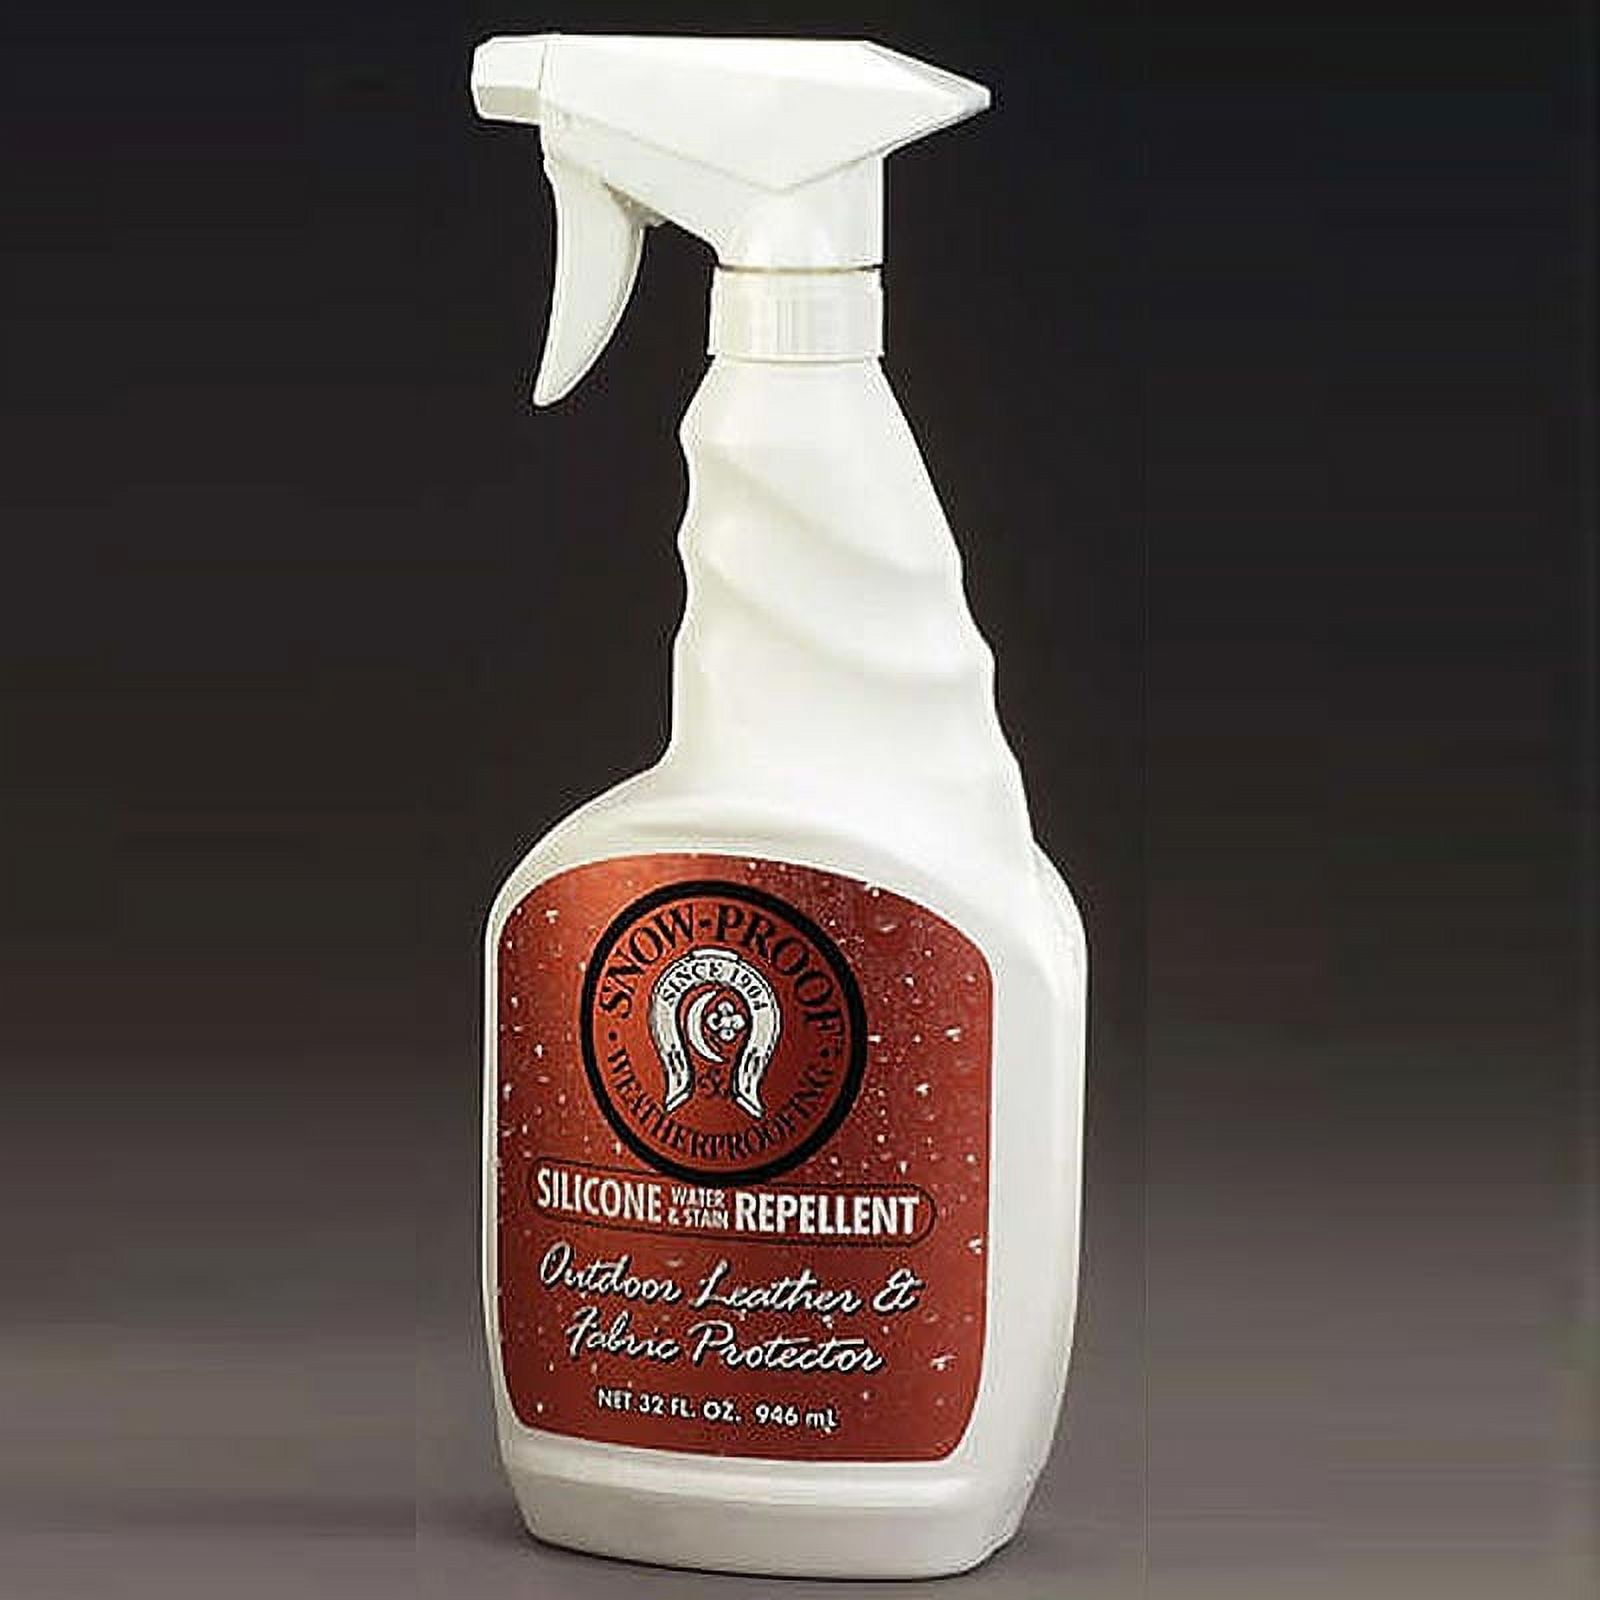 ZOYONE Shield Water and Stain Leather and Fabric Protector Spray for Shoes  Waterproof